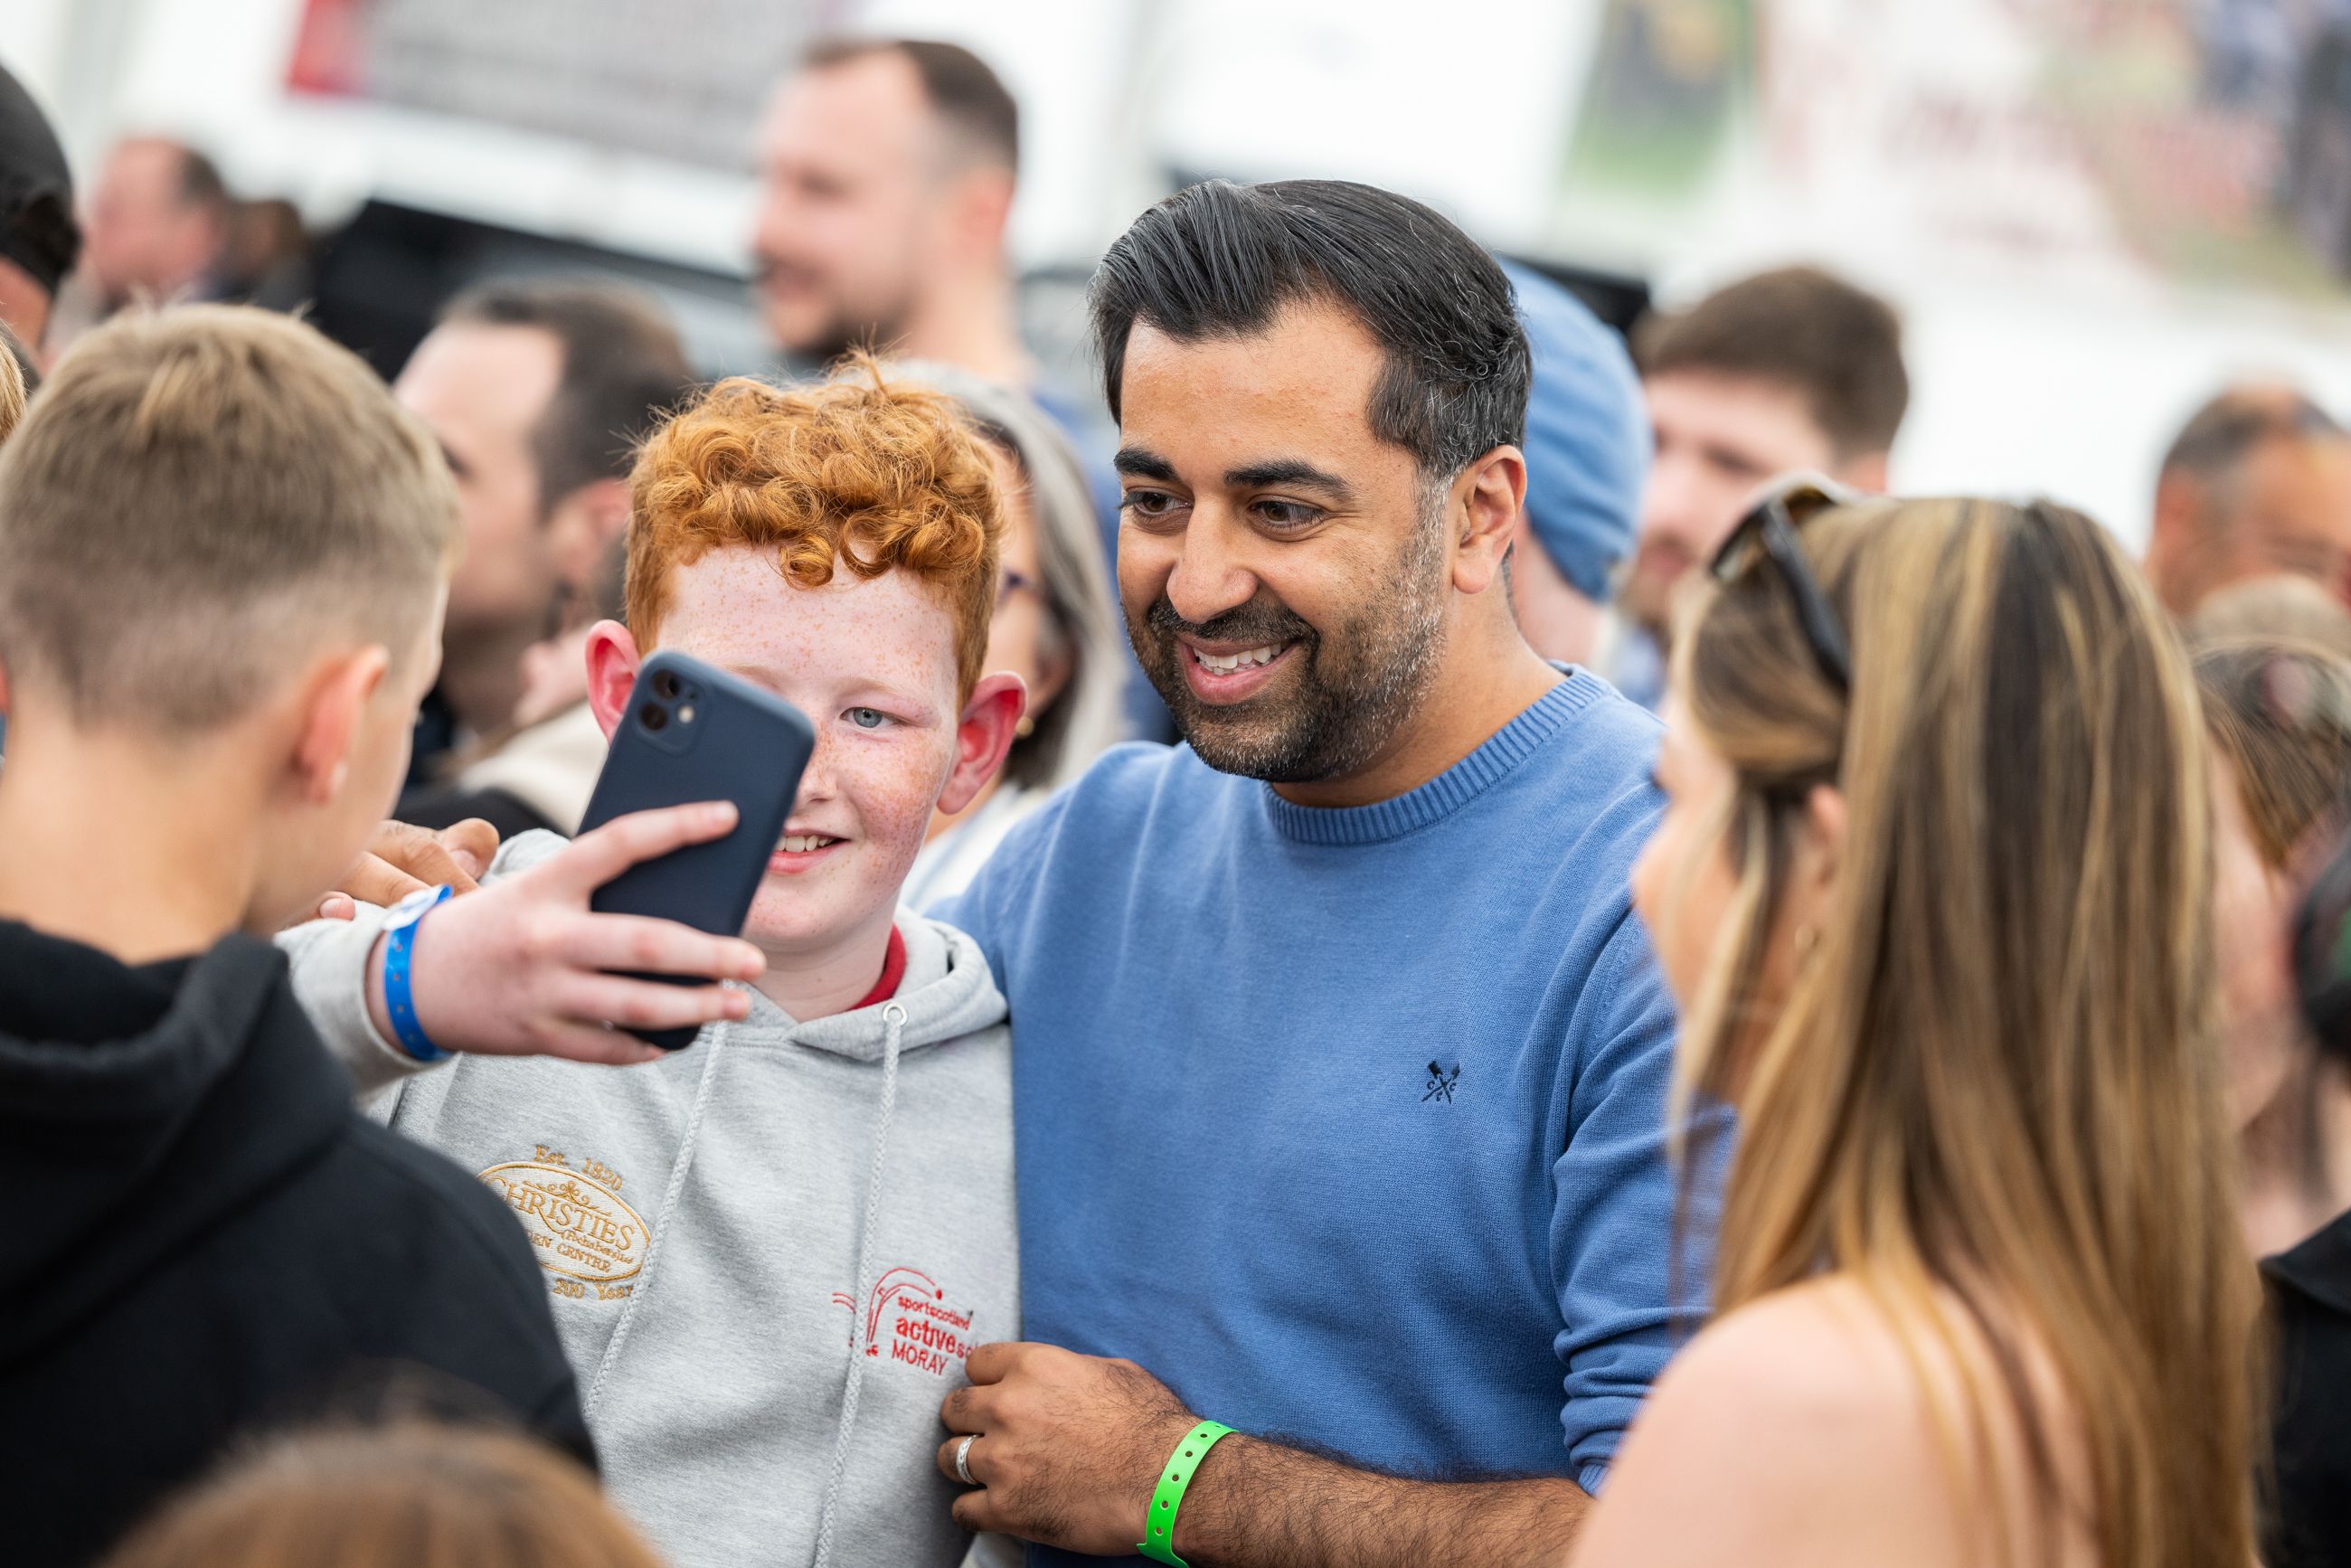 Humza poses for a selfie with a fan at Speyfest.